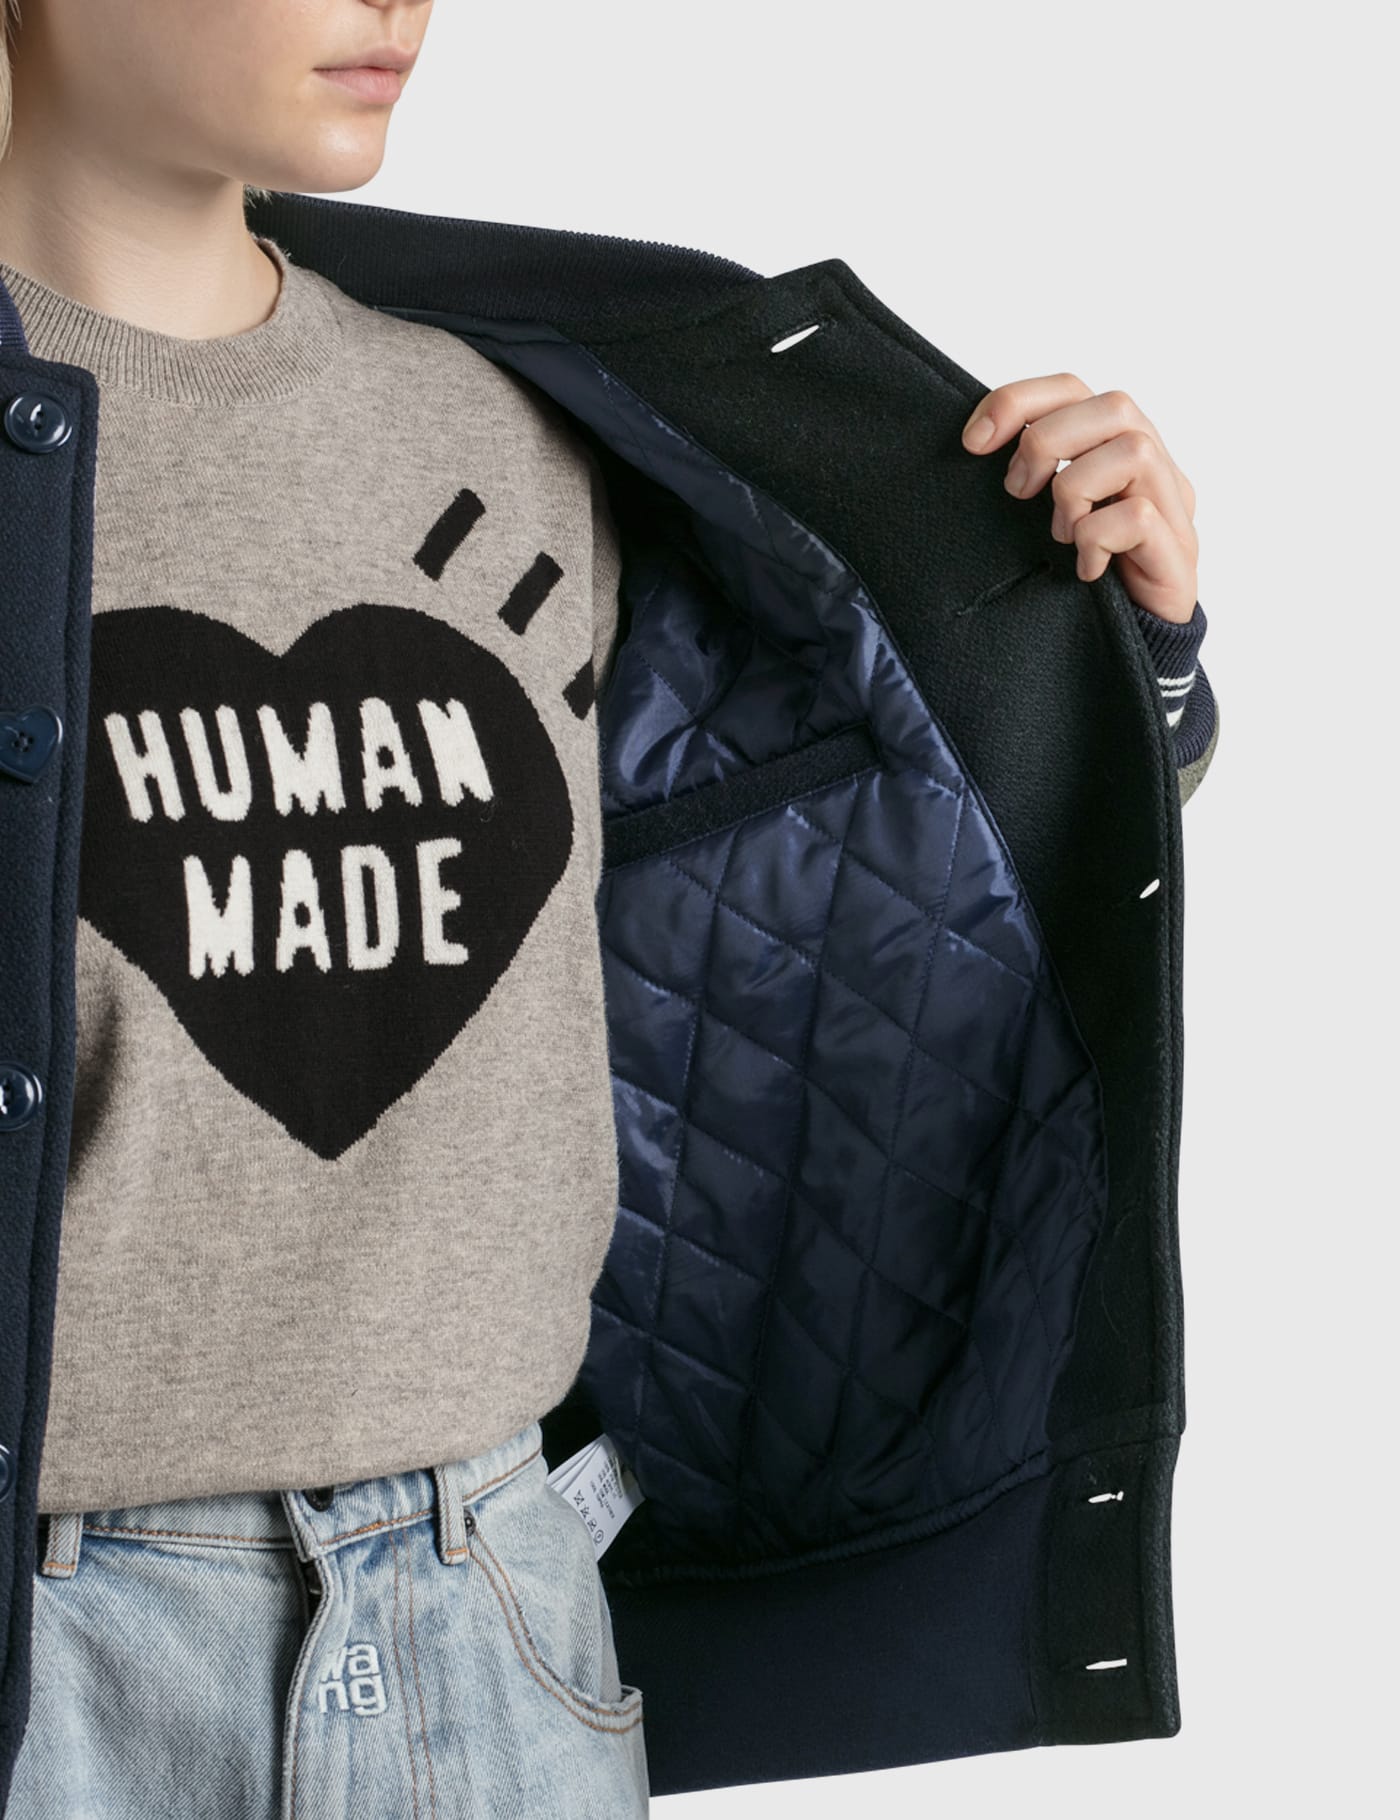 Human Made - Varsity Jacket | HBX - Globally Curated Fashion and Lifestyle  by Hypebeast